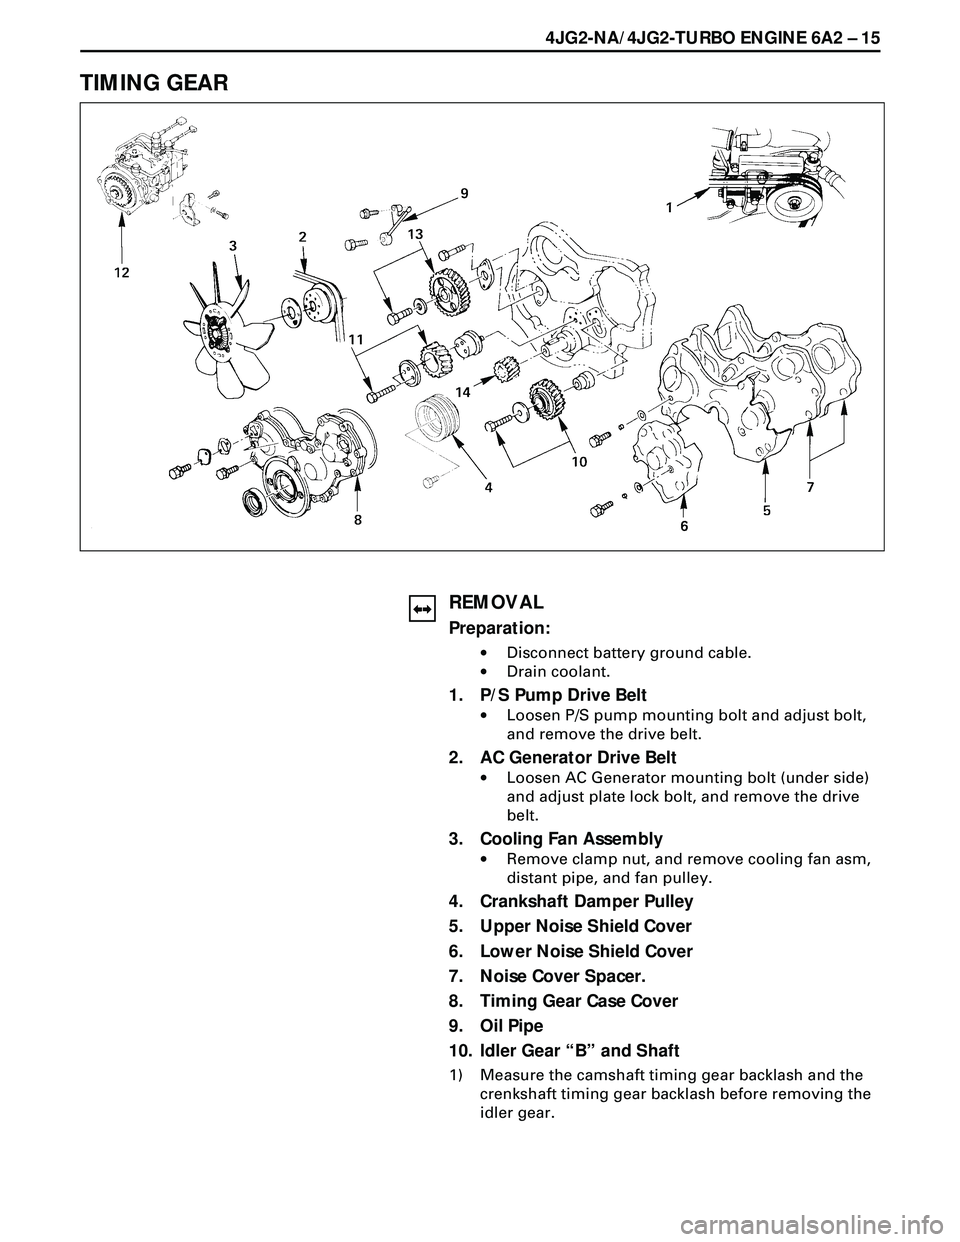 ISUZU TROOPER 1998  Service Owners Guide 4JG2-NA/4JG2-TURBO ENGINE 6A2 Ð 15
TIMING GEAR
REMOVAL
Preparation:
·Disconnect battery ground cable.
·Drain coolant.
1. P/S Pump Drive Belt
·Loosen P/S pump mounting bolt and adjust bolt,
and rem